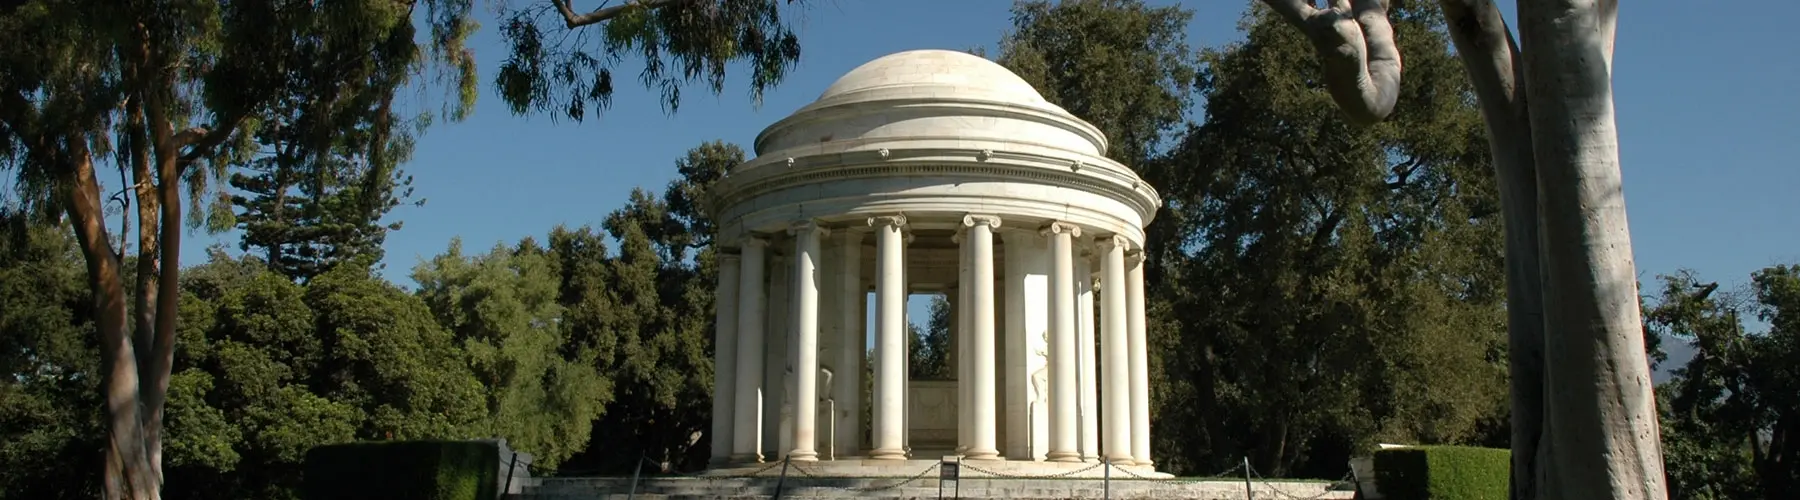 A marble rotunda designed in the form of a Greek temple envelopes an ornate sarcophagus. A series of hanging black chains some 2-3 feet off of the ground lines the foreground of the rotunda.